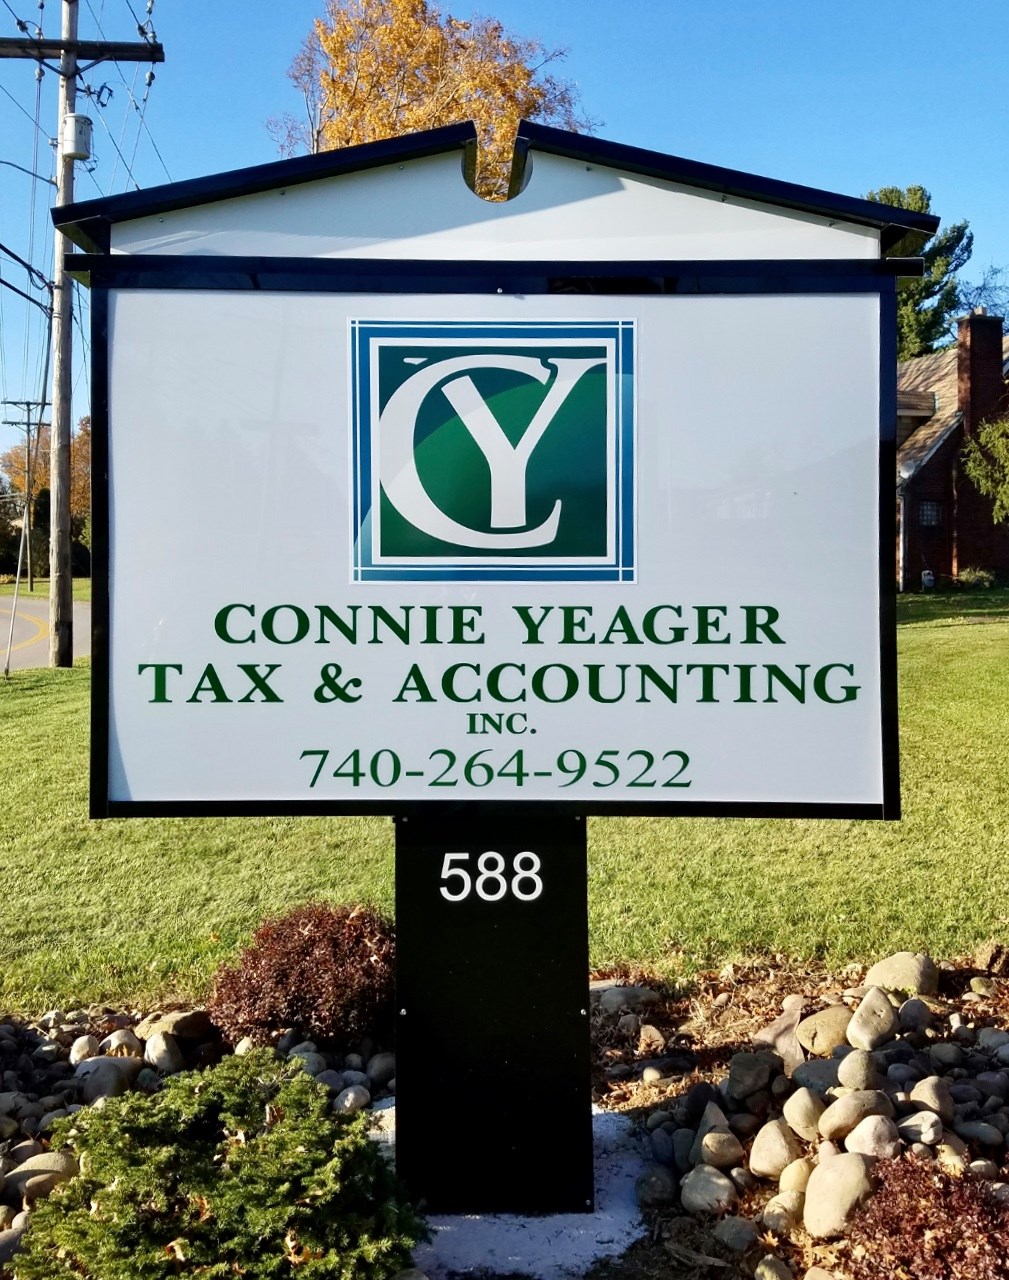 Connie Yeager Tax & Accounting, Inc. 588 Lovers Ln, Steubenville Ohio 43953